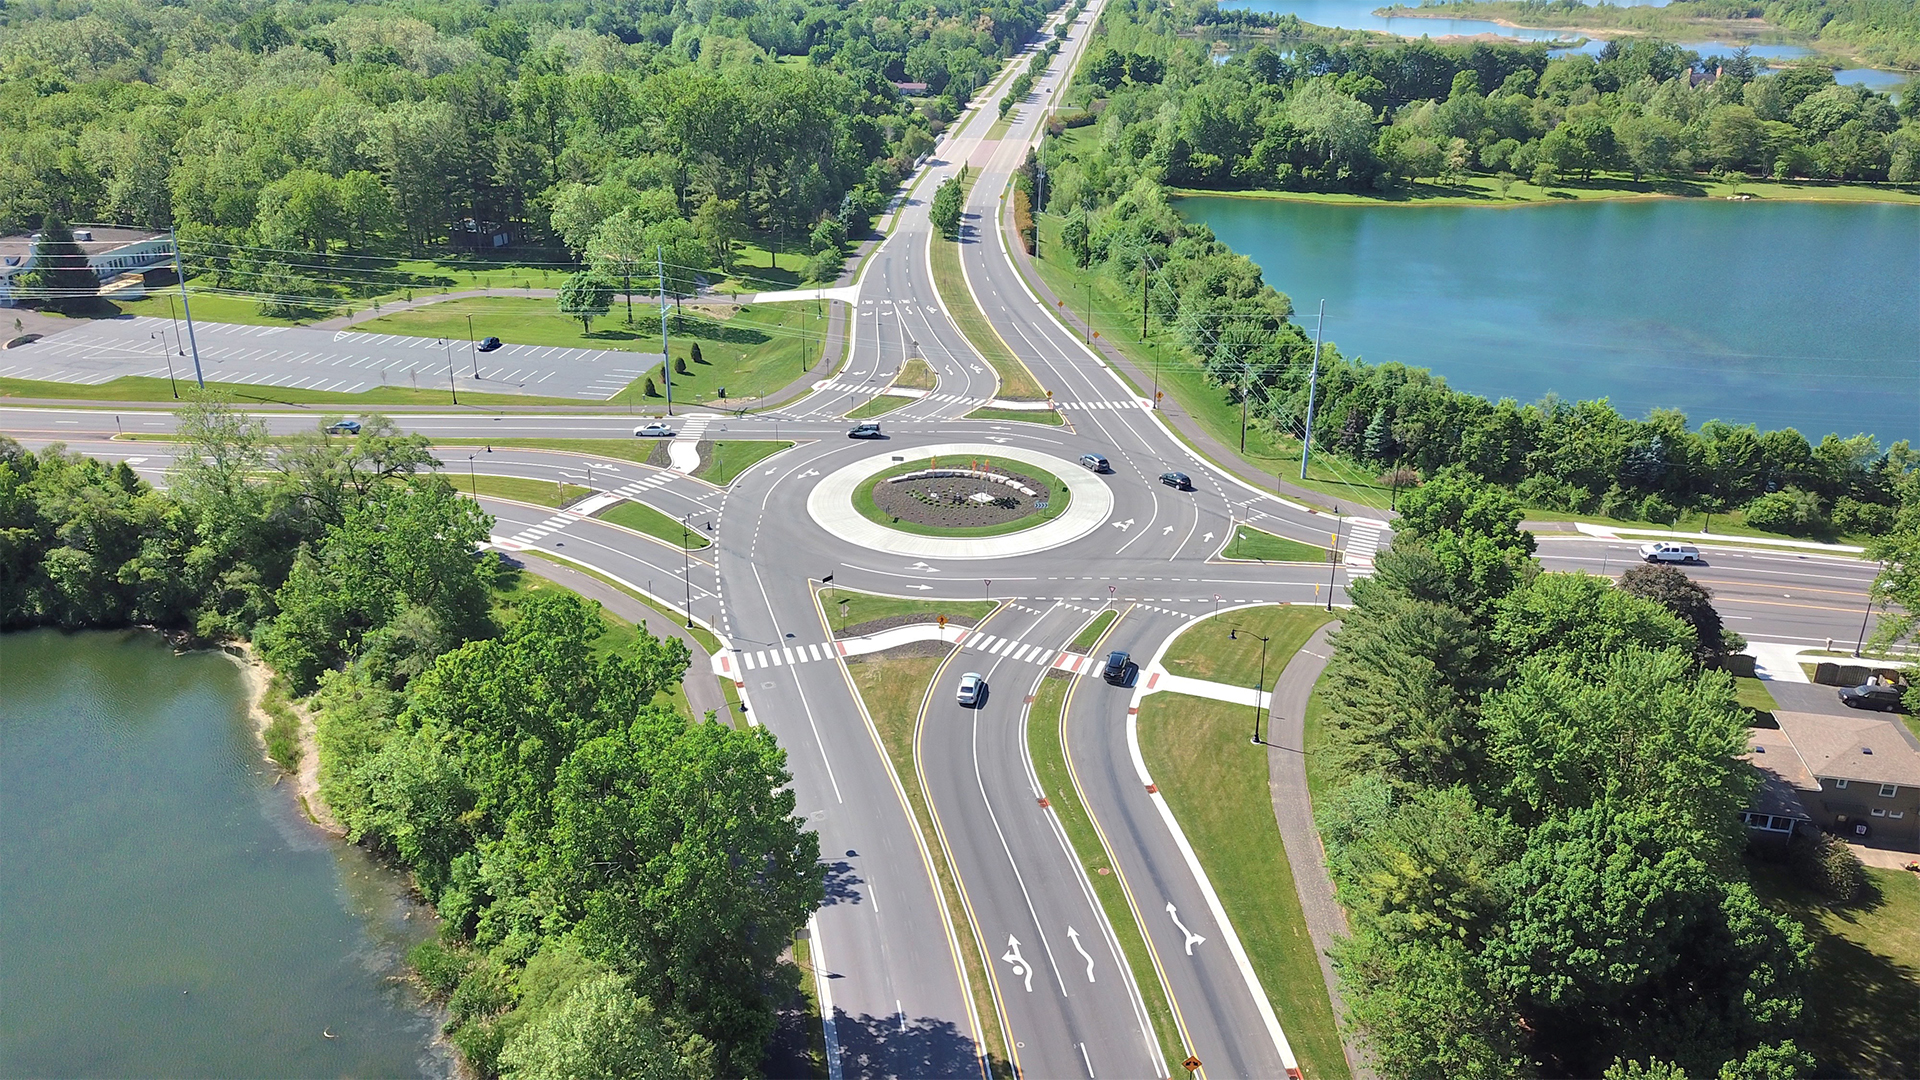 Carmel Roundabout Design at 116th and Hazel Dell Project Image